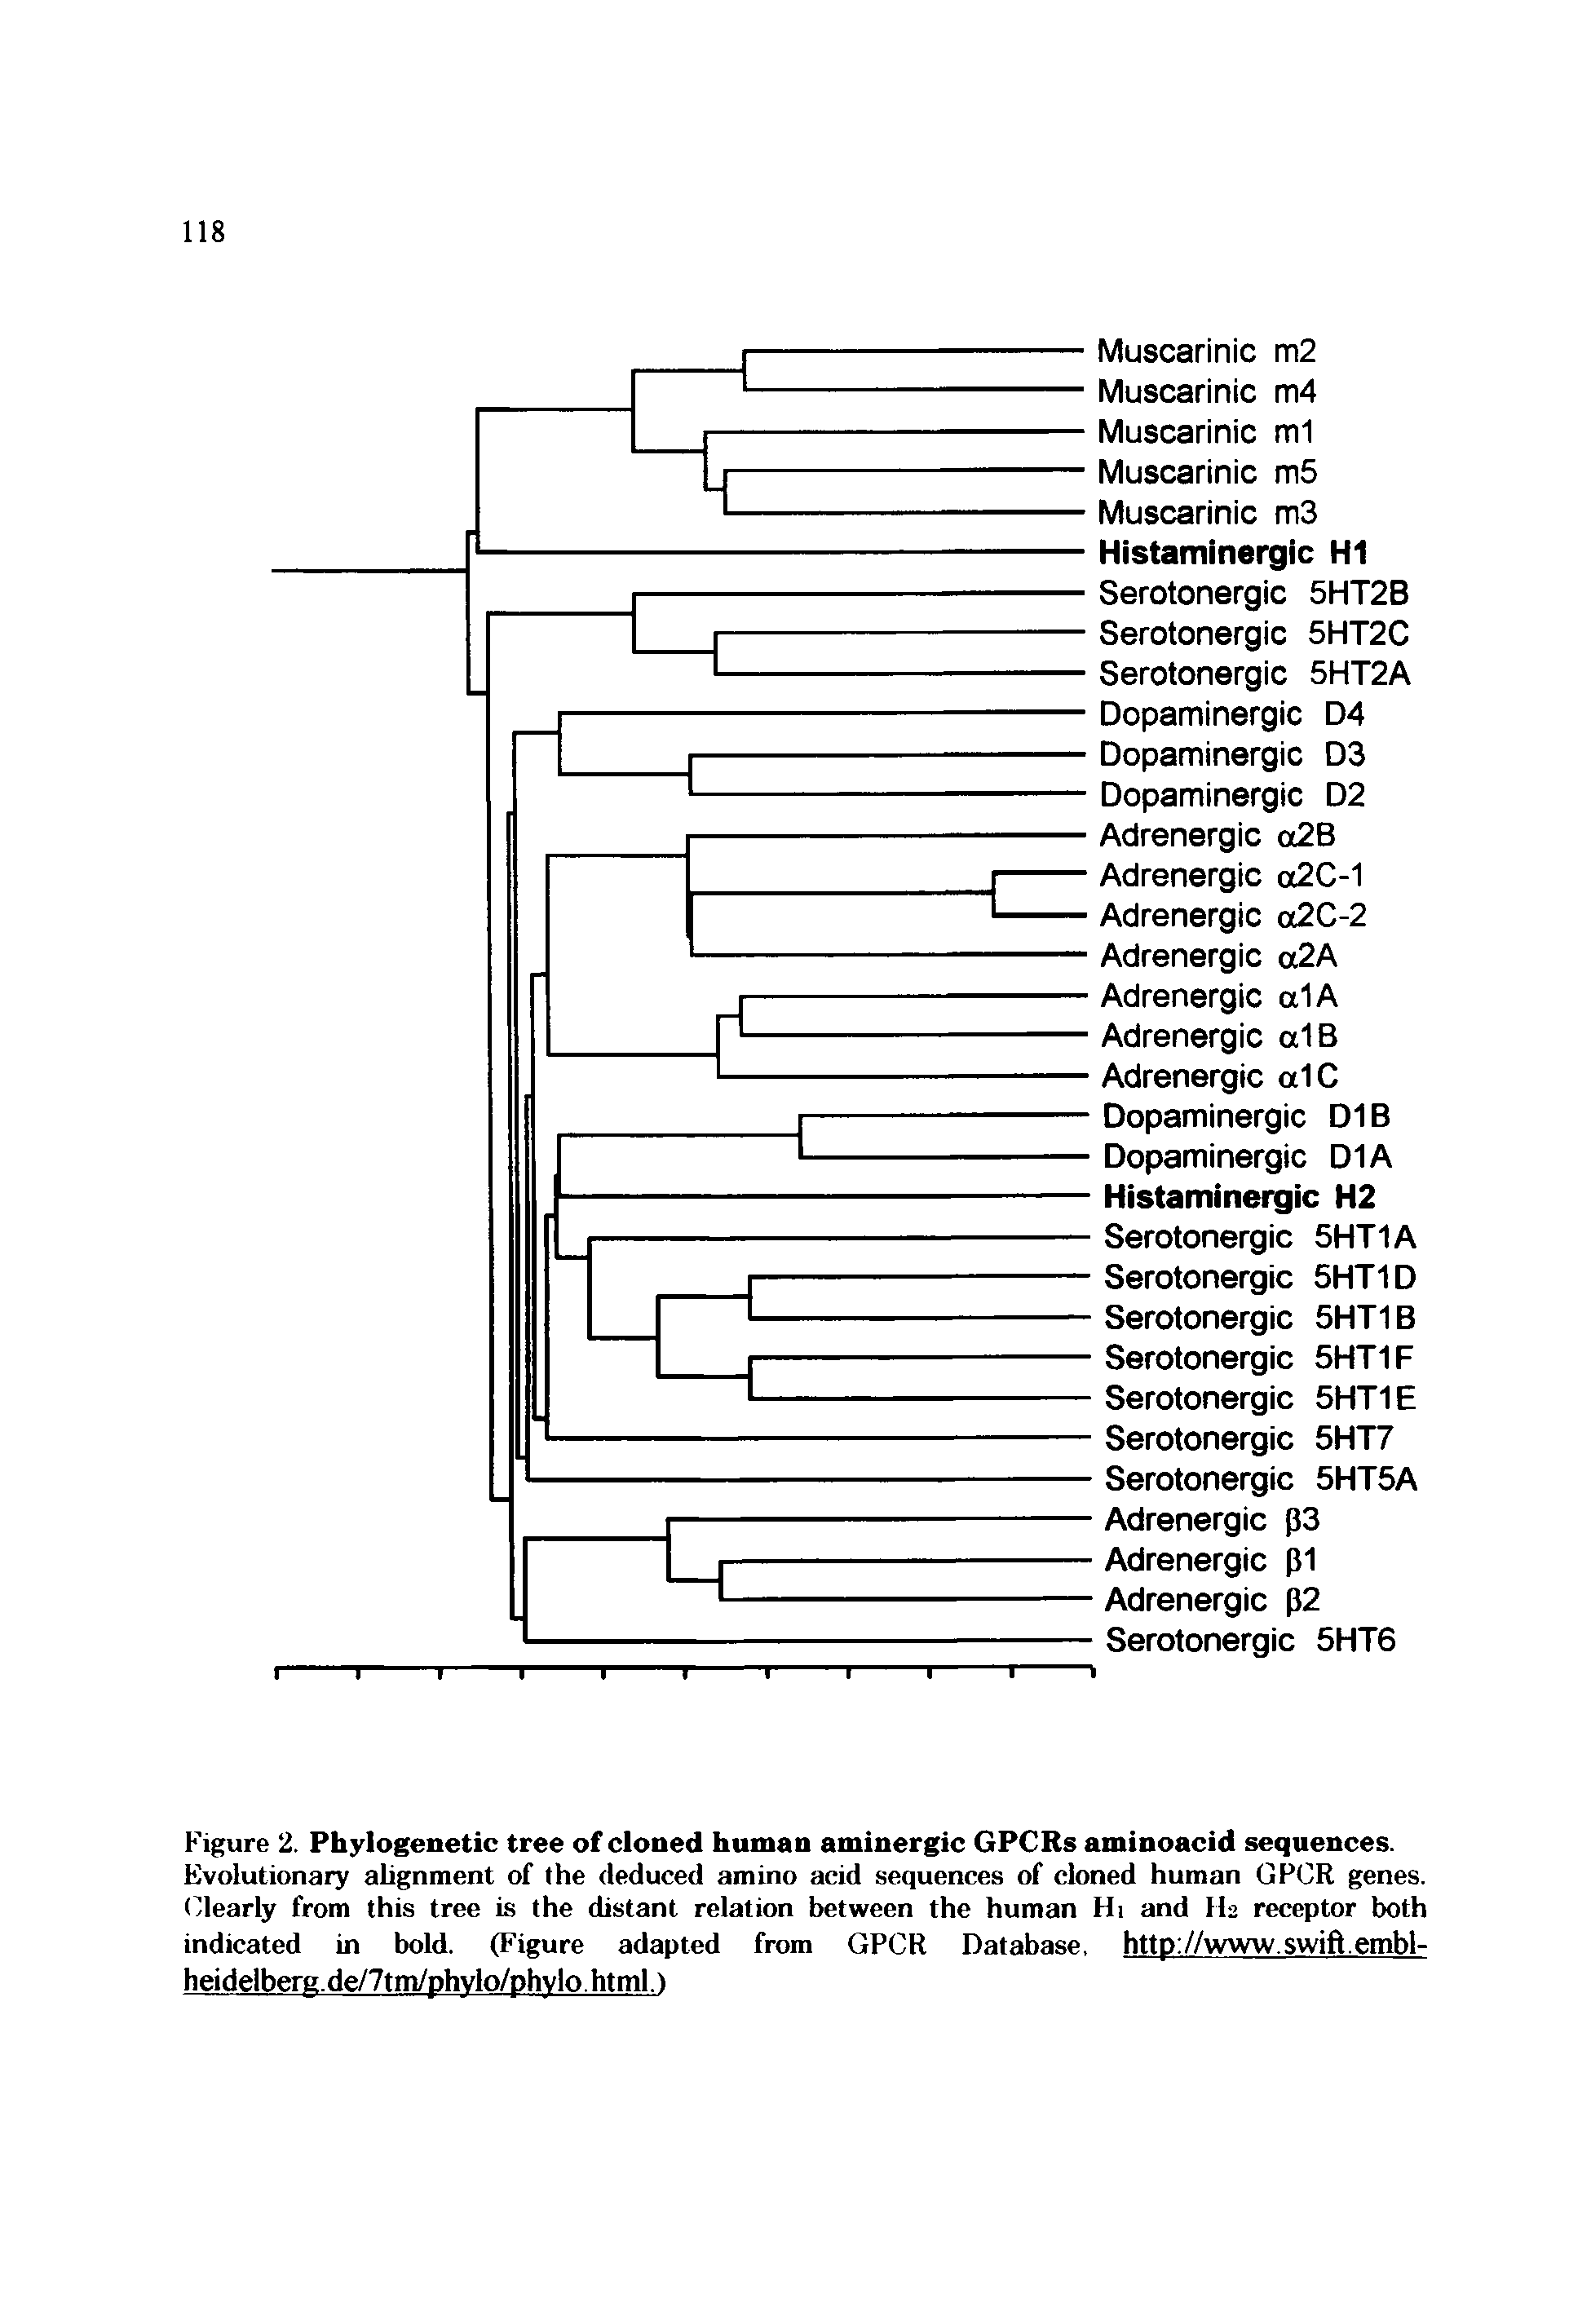 Figure 2. Phylogenetic tree of cloned human aminergic GPCRs aminoacid sequences.